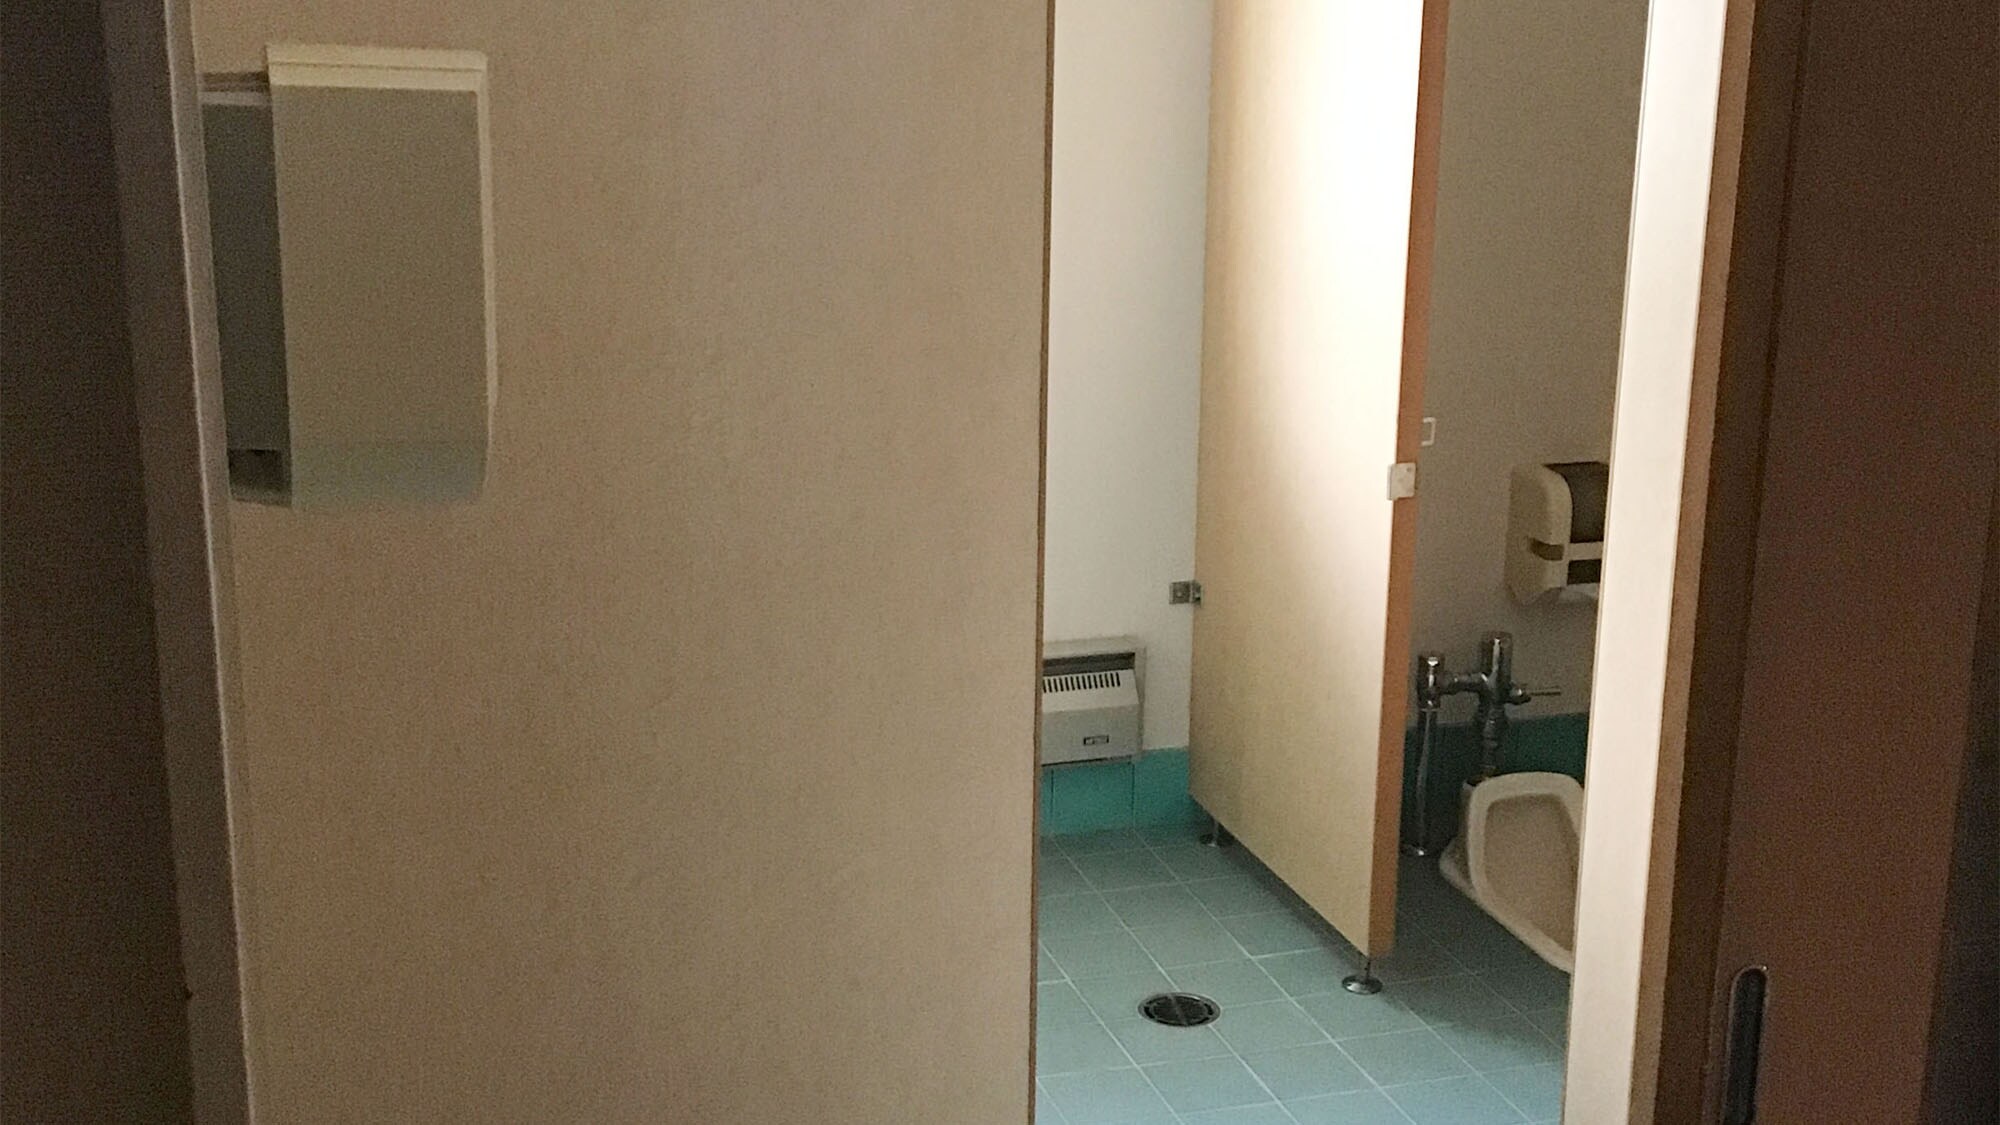 ・ The toilet in the Japanese-style room is shared.